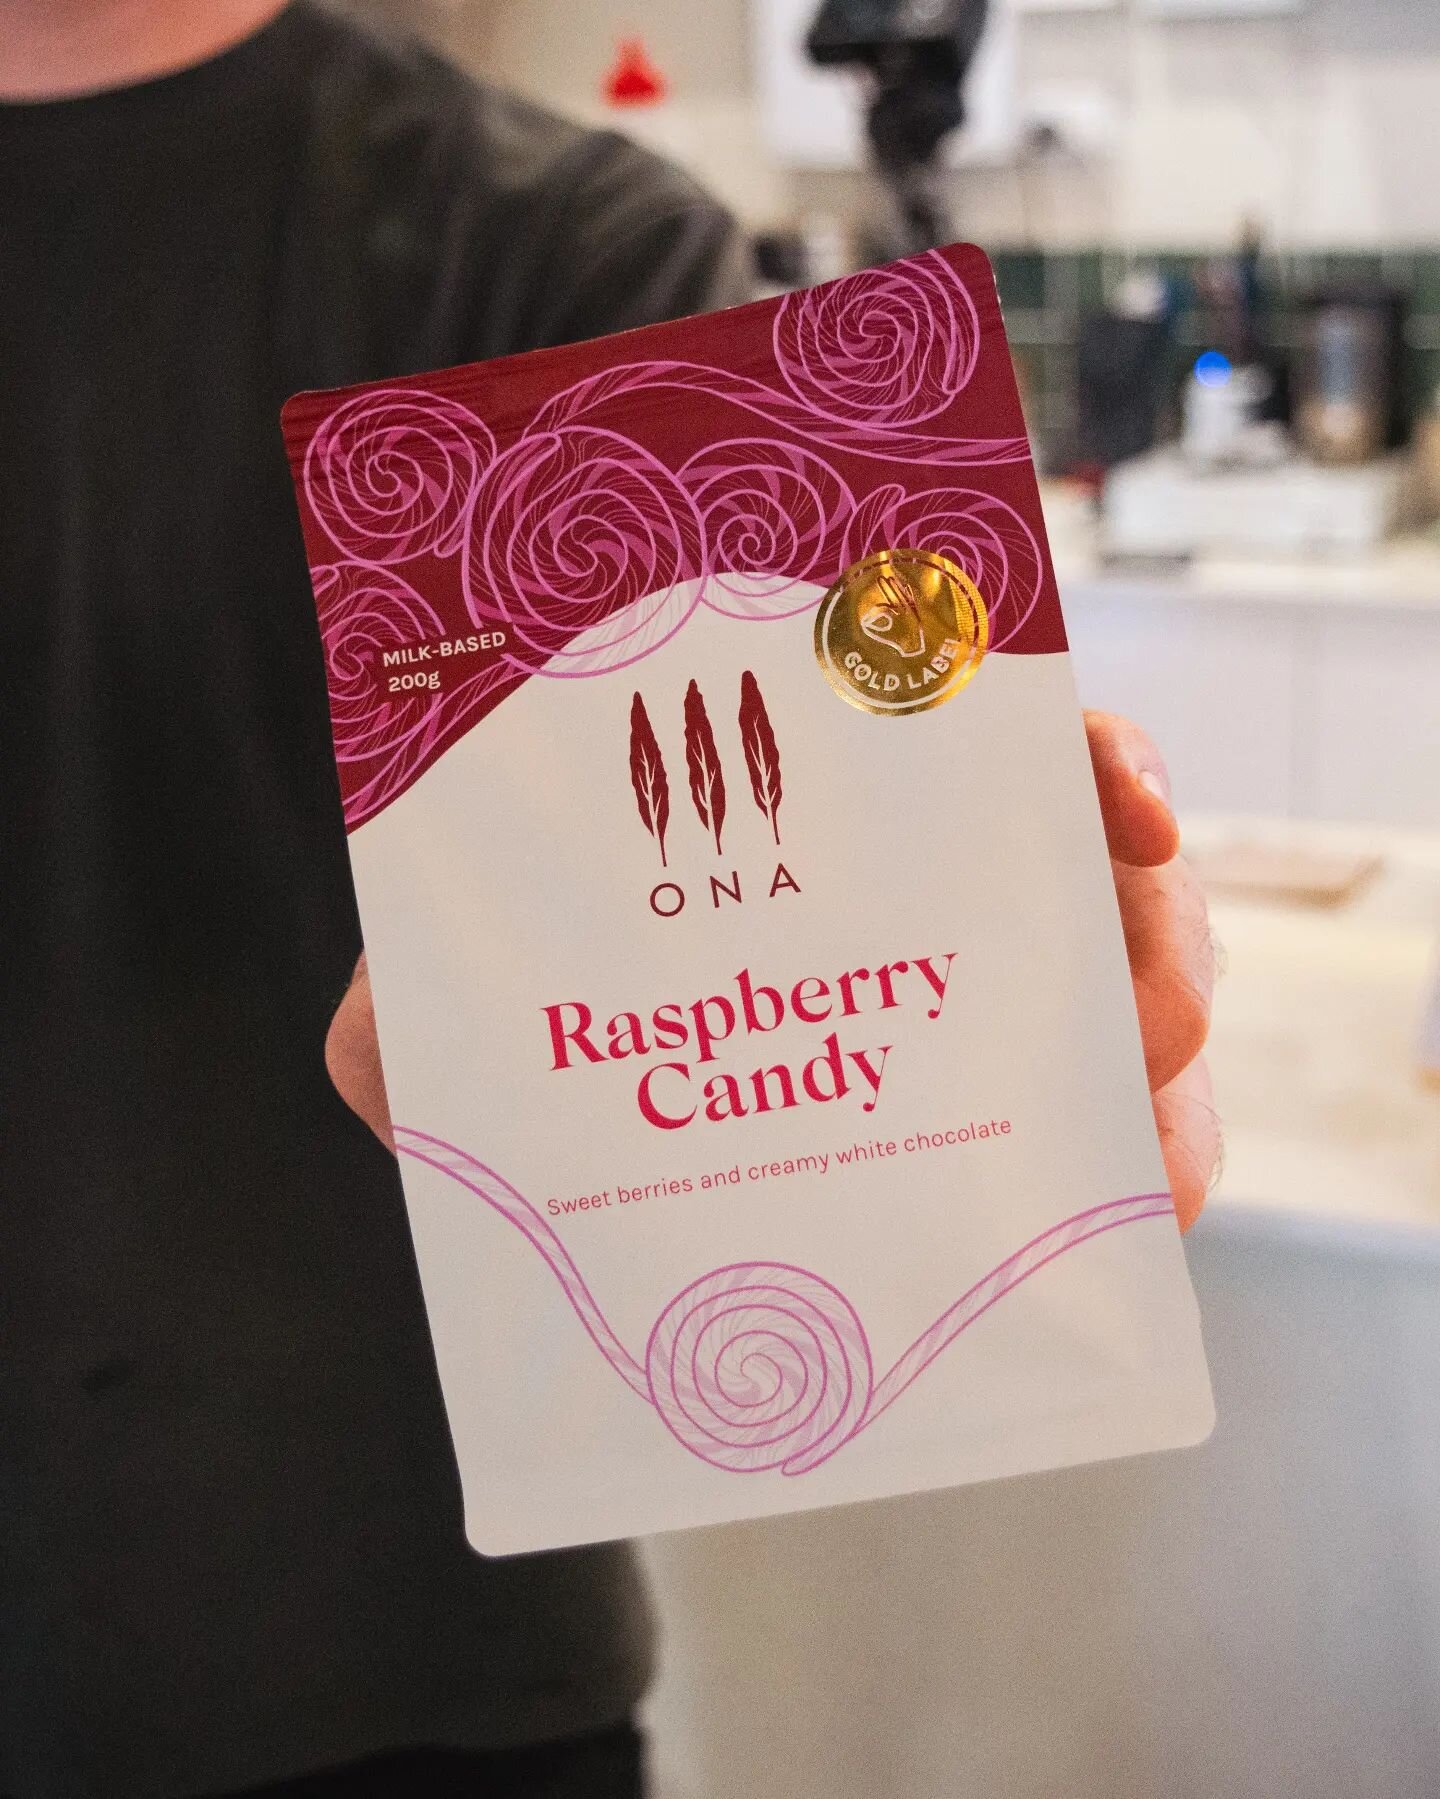 We've got some fresh Raspberry Candy retail that just hit the shelves! Come through before they're all gone ✨